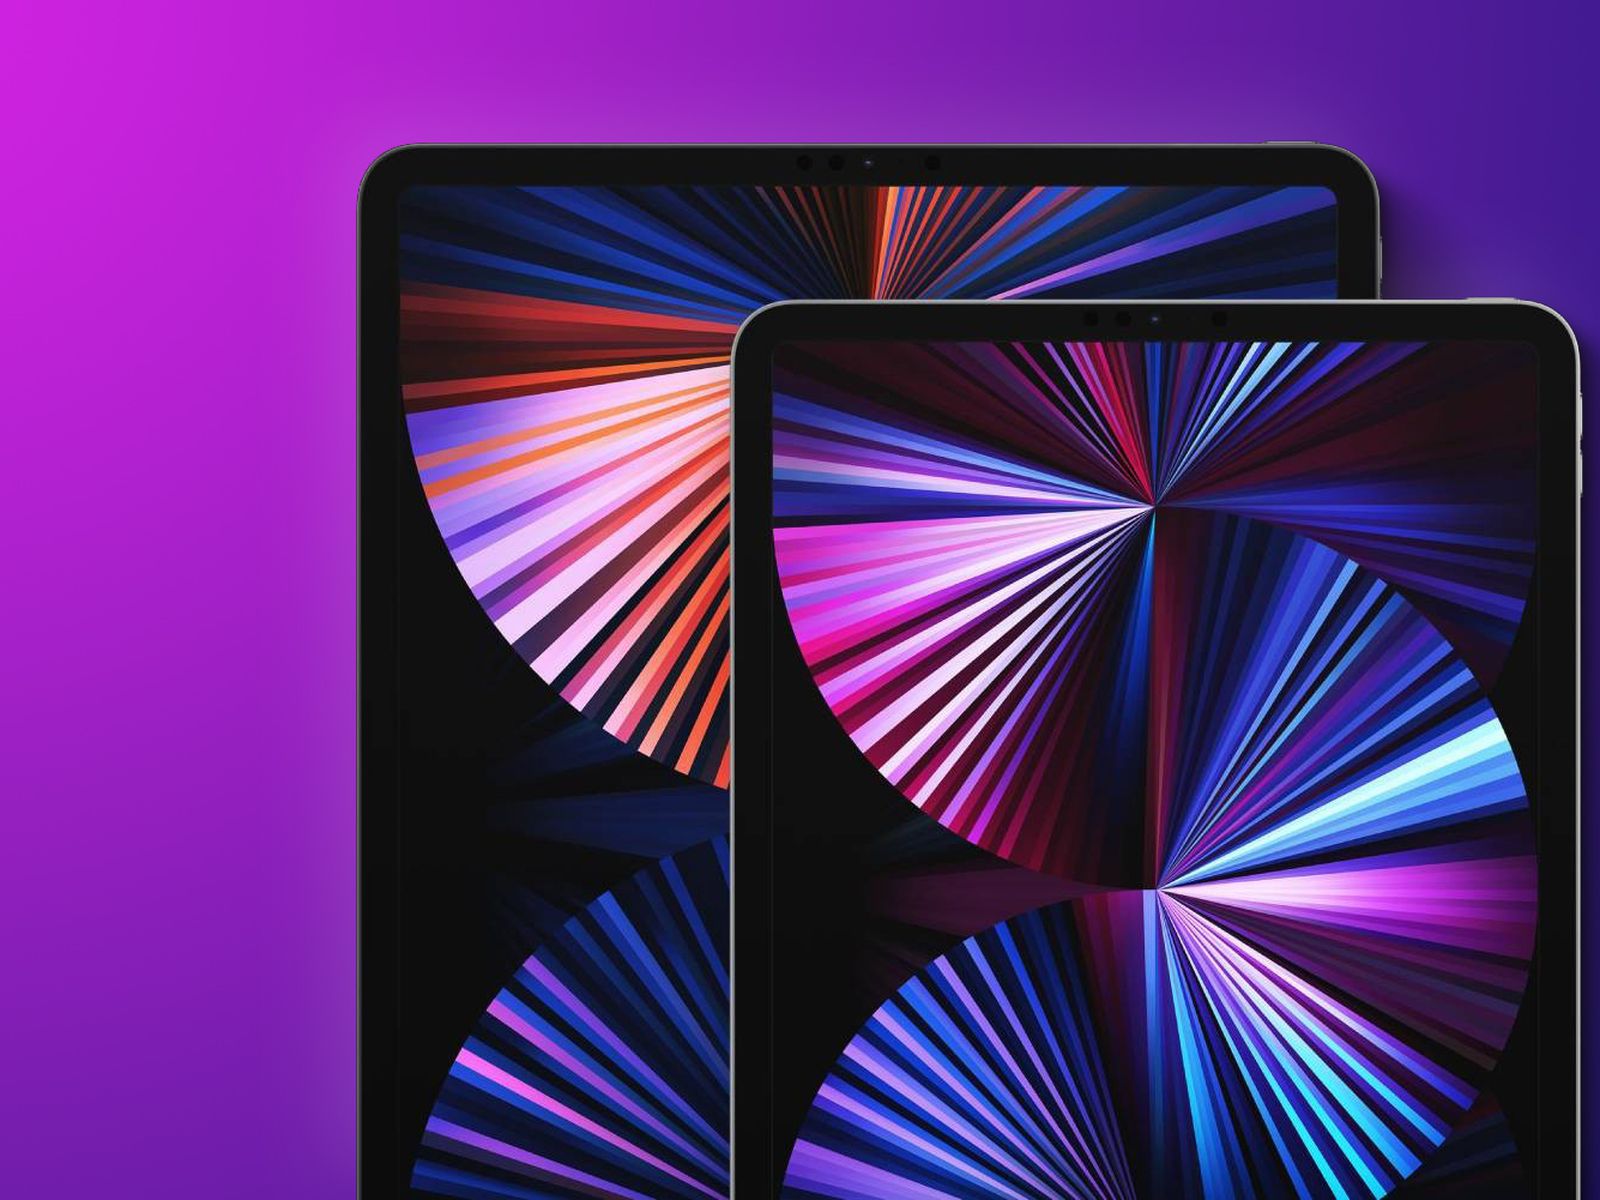 Grab the M1 iPad Pro Wallpapers